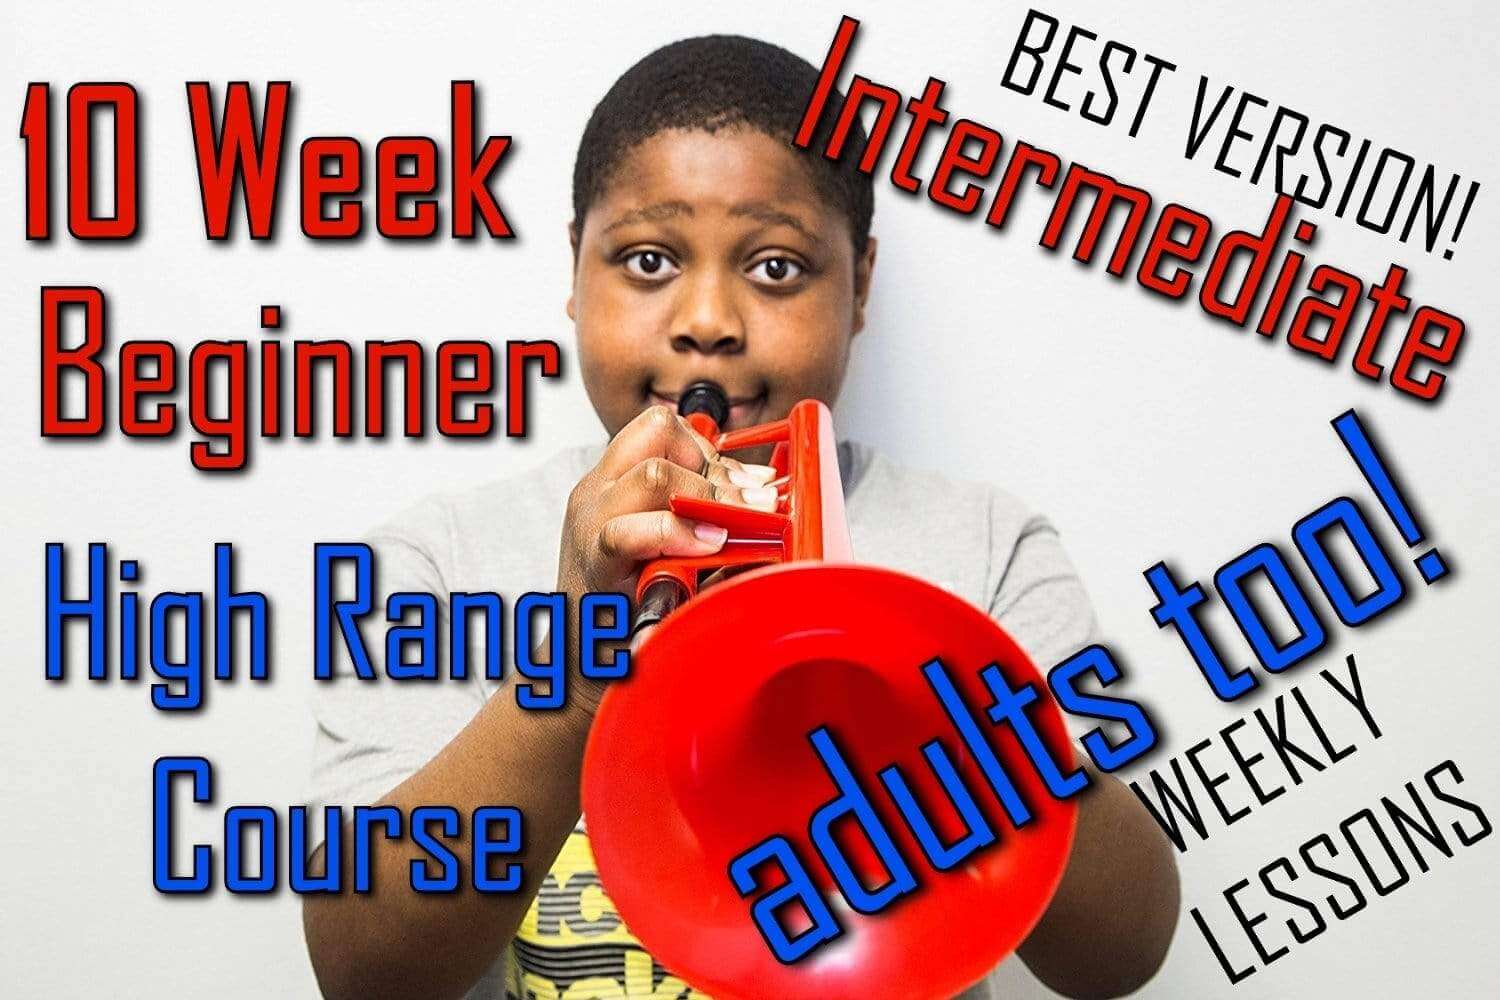 Live, Weekly Lessons- 10 Week Beginner-Intermediate Upper Register High Range Course for Trumpet and all Brass Players - Trumpetsizzle